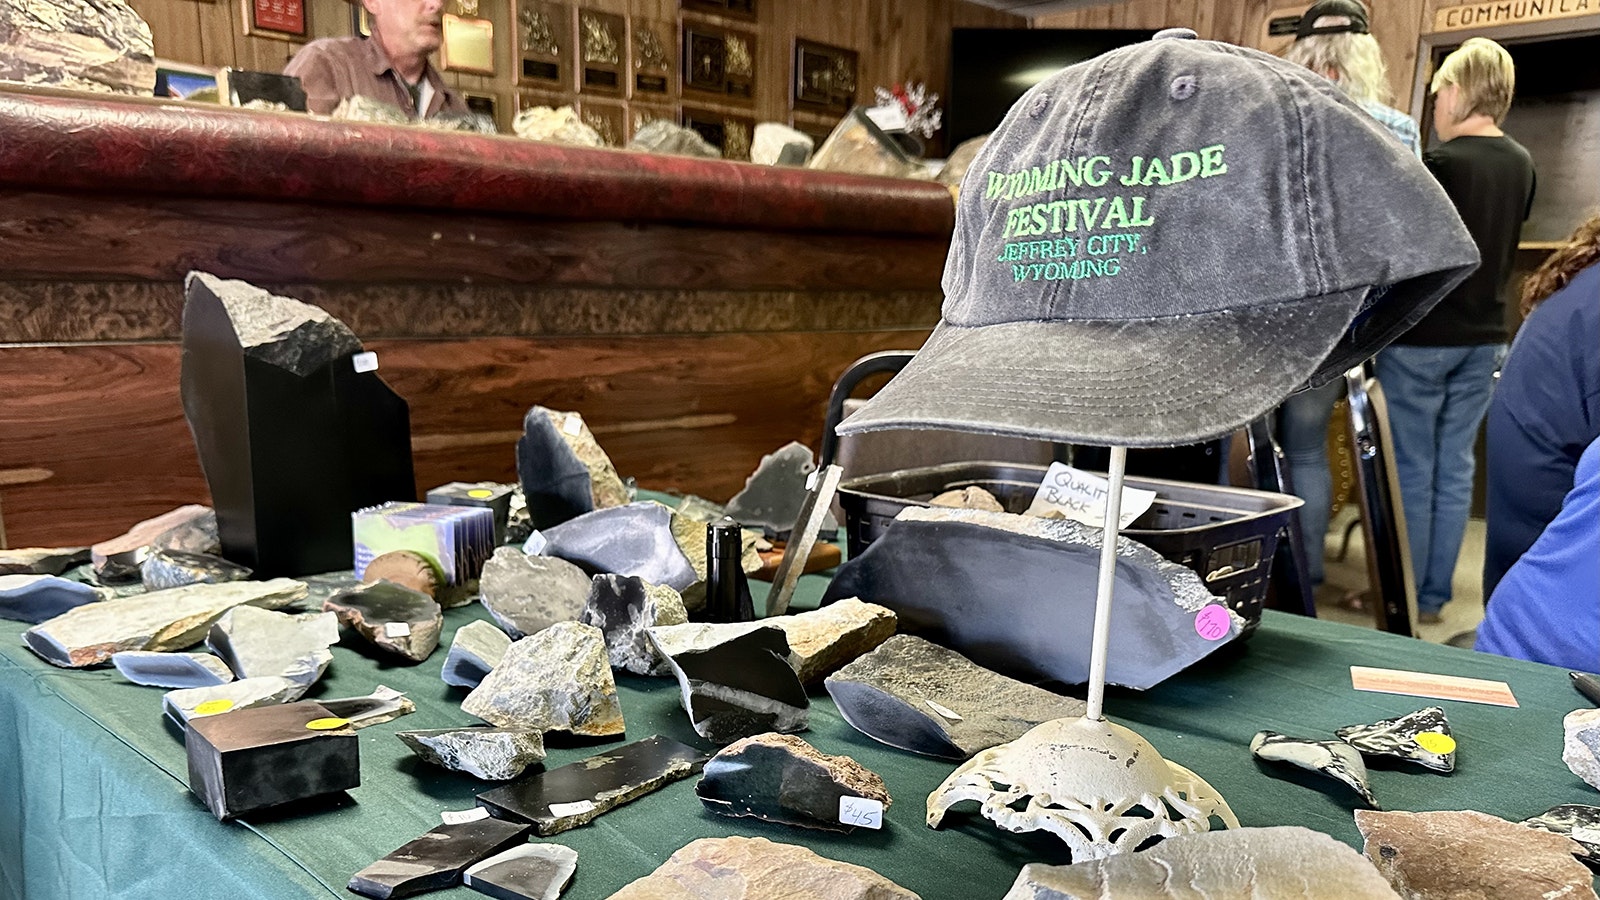 : A Wyoming Jade Festival ballcap among several Wyoming jade samples. Wyoming jade is considered to be some of the finest in the world, and there have been land claims for jade mining as recently as 2018.